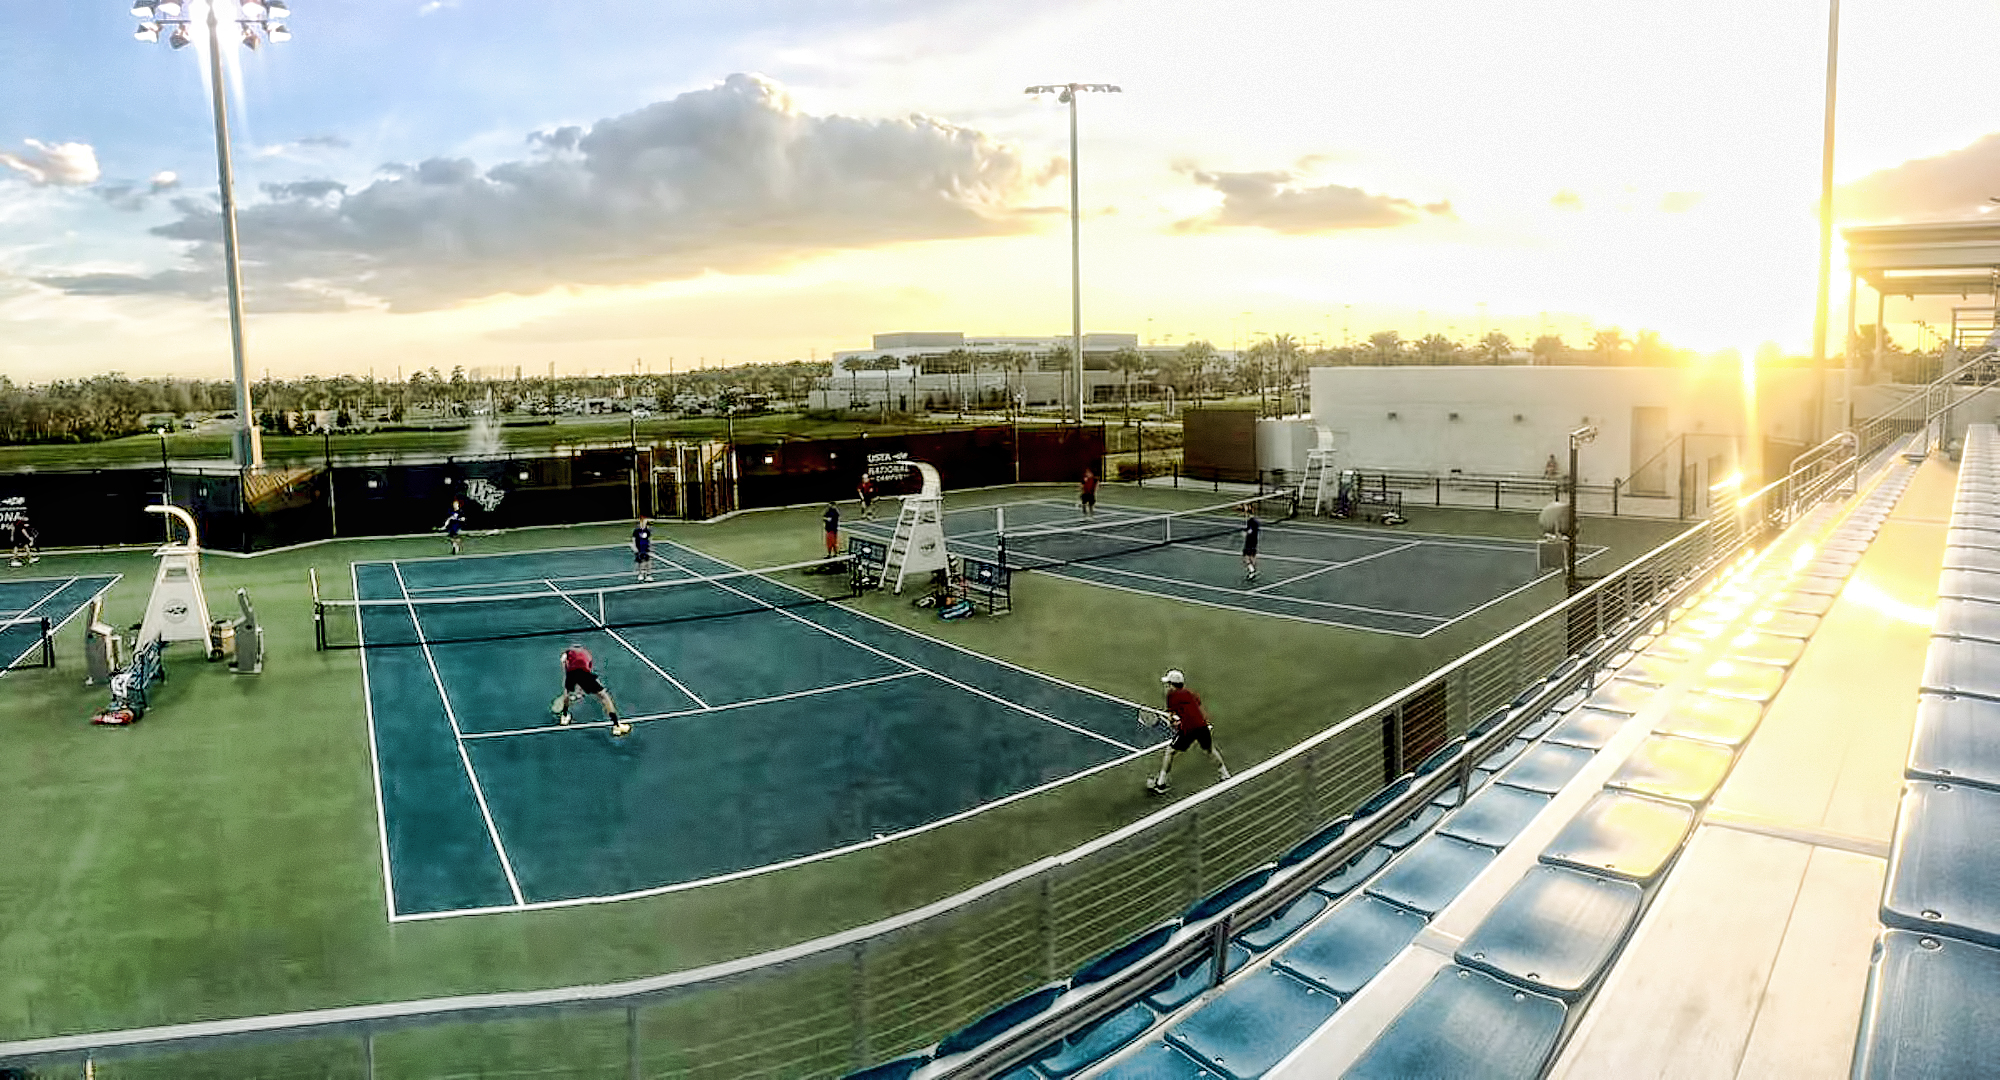 The Cobber doubles teams play under the setting sun at the USTA Tennis Center in Orlando.